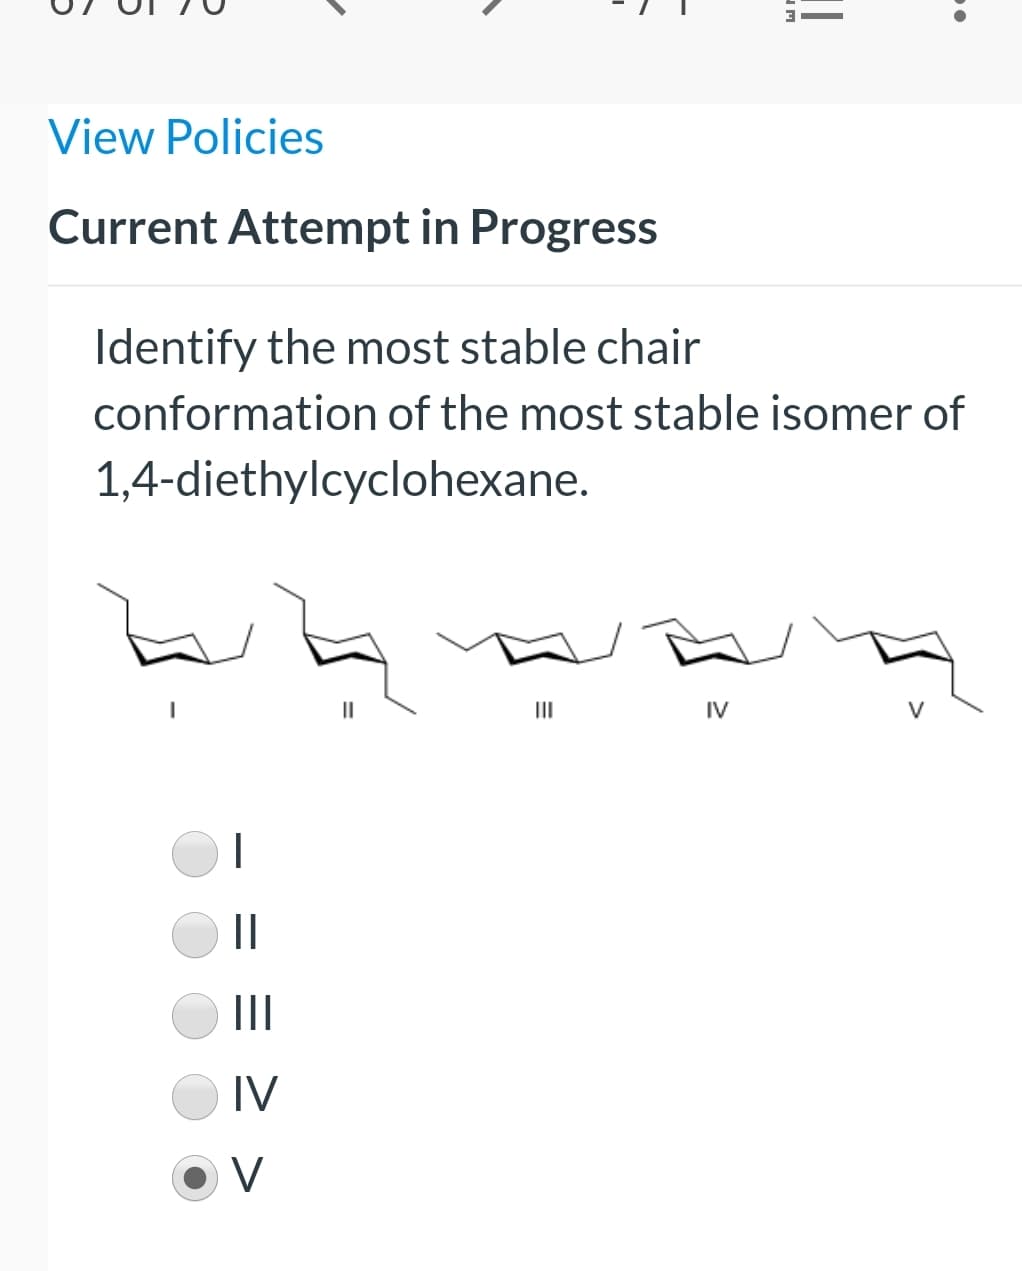 View Policies
Current Attempt in Progress
Identify the most stable chair
conformation of the most stable isomer of
1,4-diethylcyclohexane.
II
IV
||
II
IV
V
